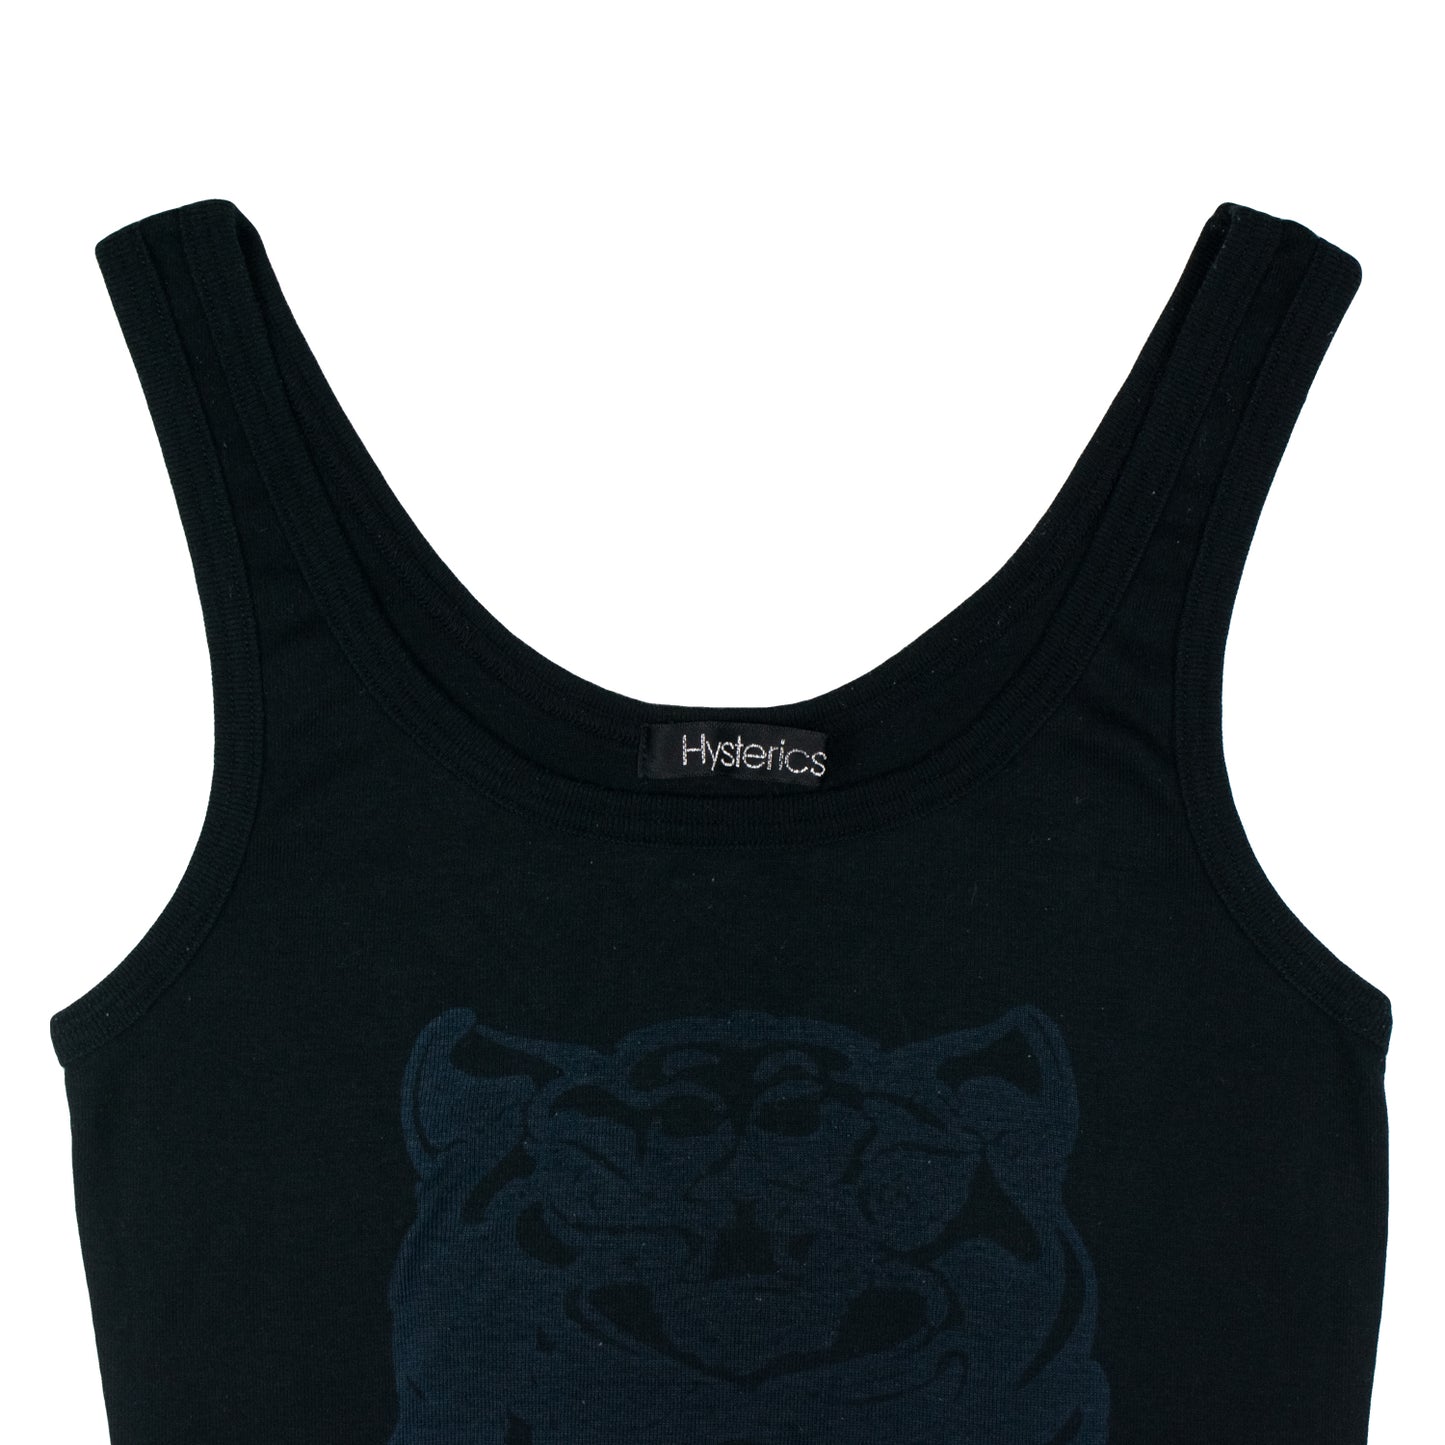 Hysteric Glamour Bobcat Mesh Graphic Tank Top